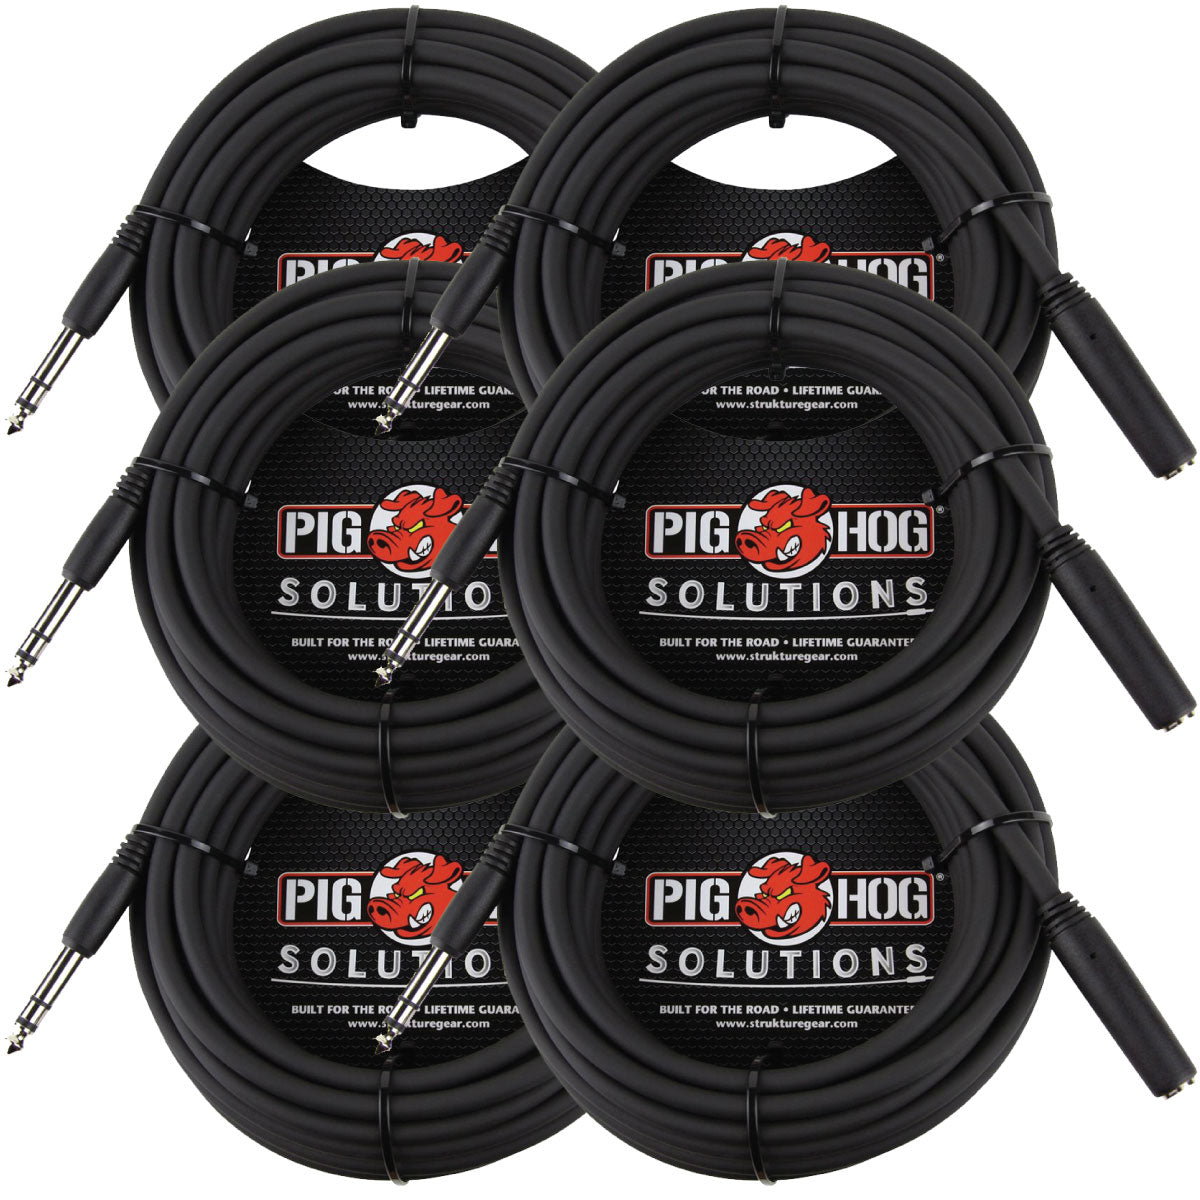 6 PACK Pig Hog PHX14-25 Solutions - 25ft Headphone Extension Cable, 1/4" - NEW